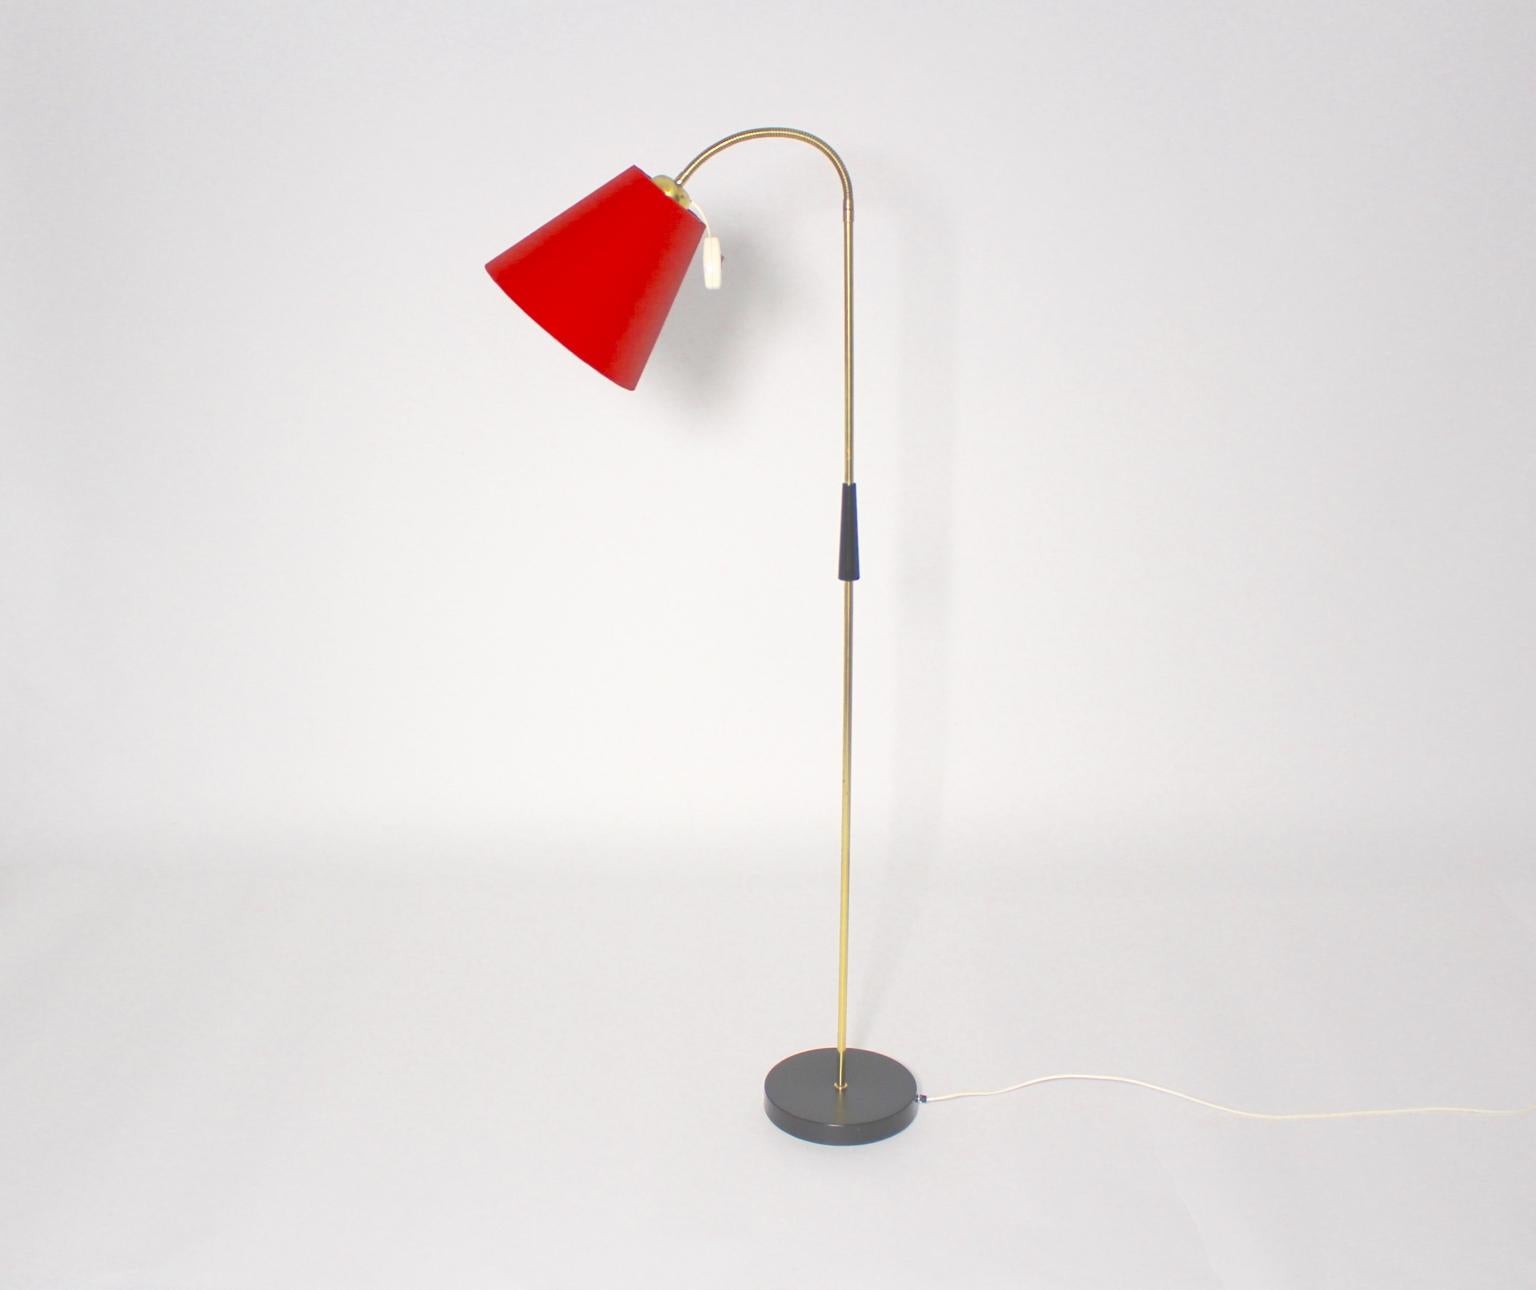 Mid Century Modern vintage floor lamp from brass 1950s Austria.
This wonderful floor lamp shows a flexible brass stem and features an adjustable height.
The adjustable height is possible to turn up with the flexible brass tube.
Furthermore the base